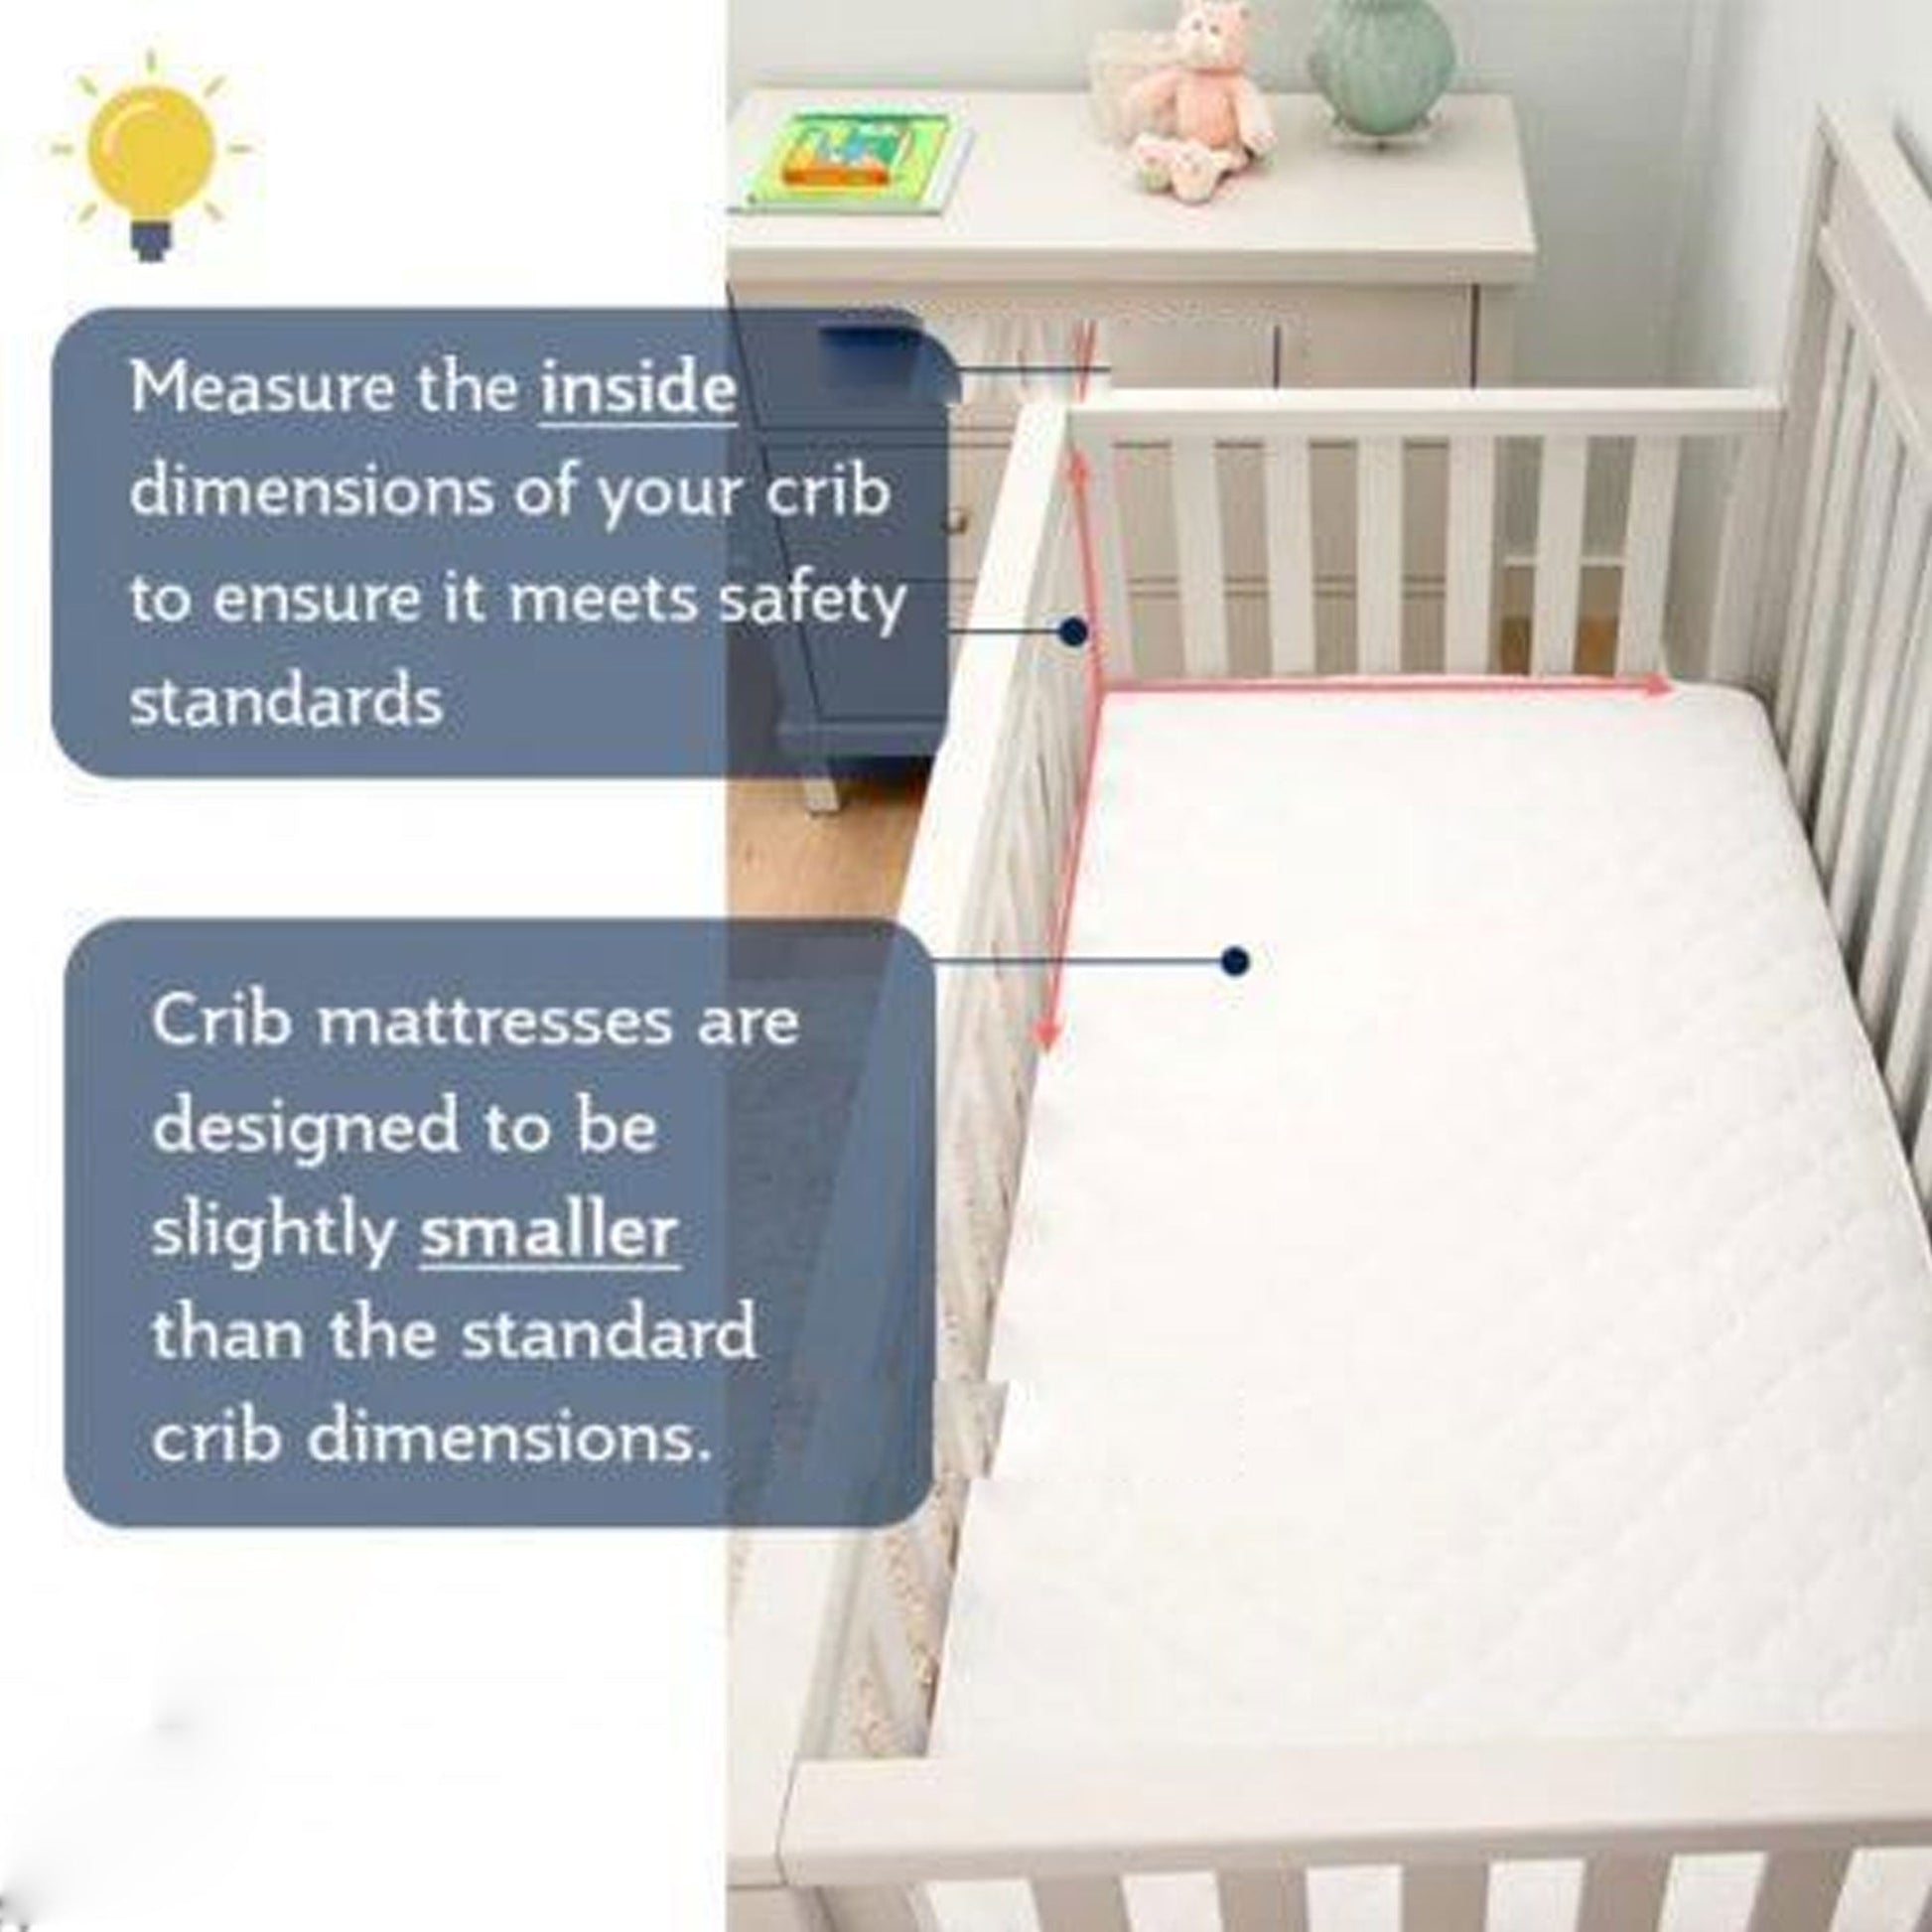 84 X 36 X 4 CM - CRIB Breathable Quilted Cot Baby Mattress - TheComfortshop.co.ukNursery Bedding0721718957171thecomfortshopTheComfortshop.co.ukCrib 84 x 3684 X 36 X 4 CM - CRIB Breathable Quilted Cot Baby Mattress - TheComfortshop.co.uk